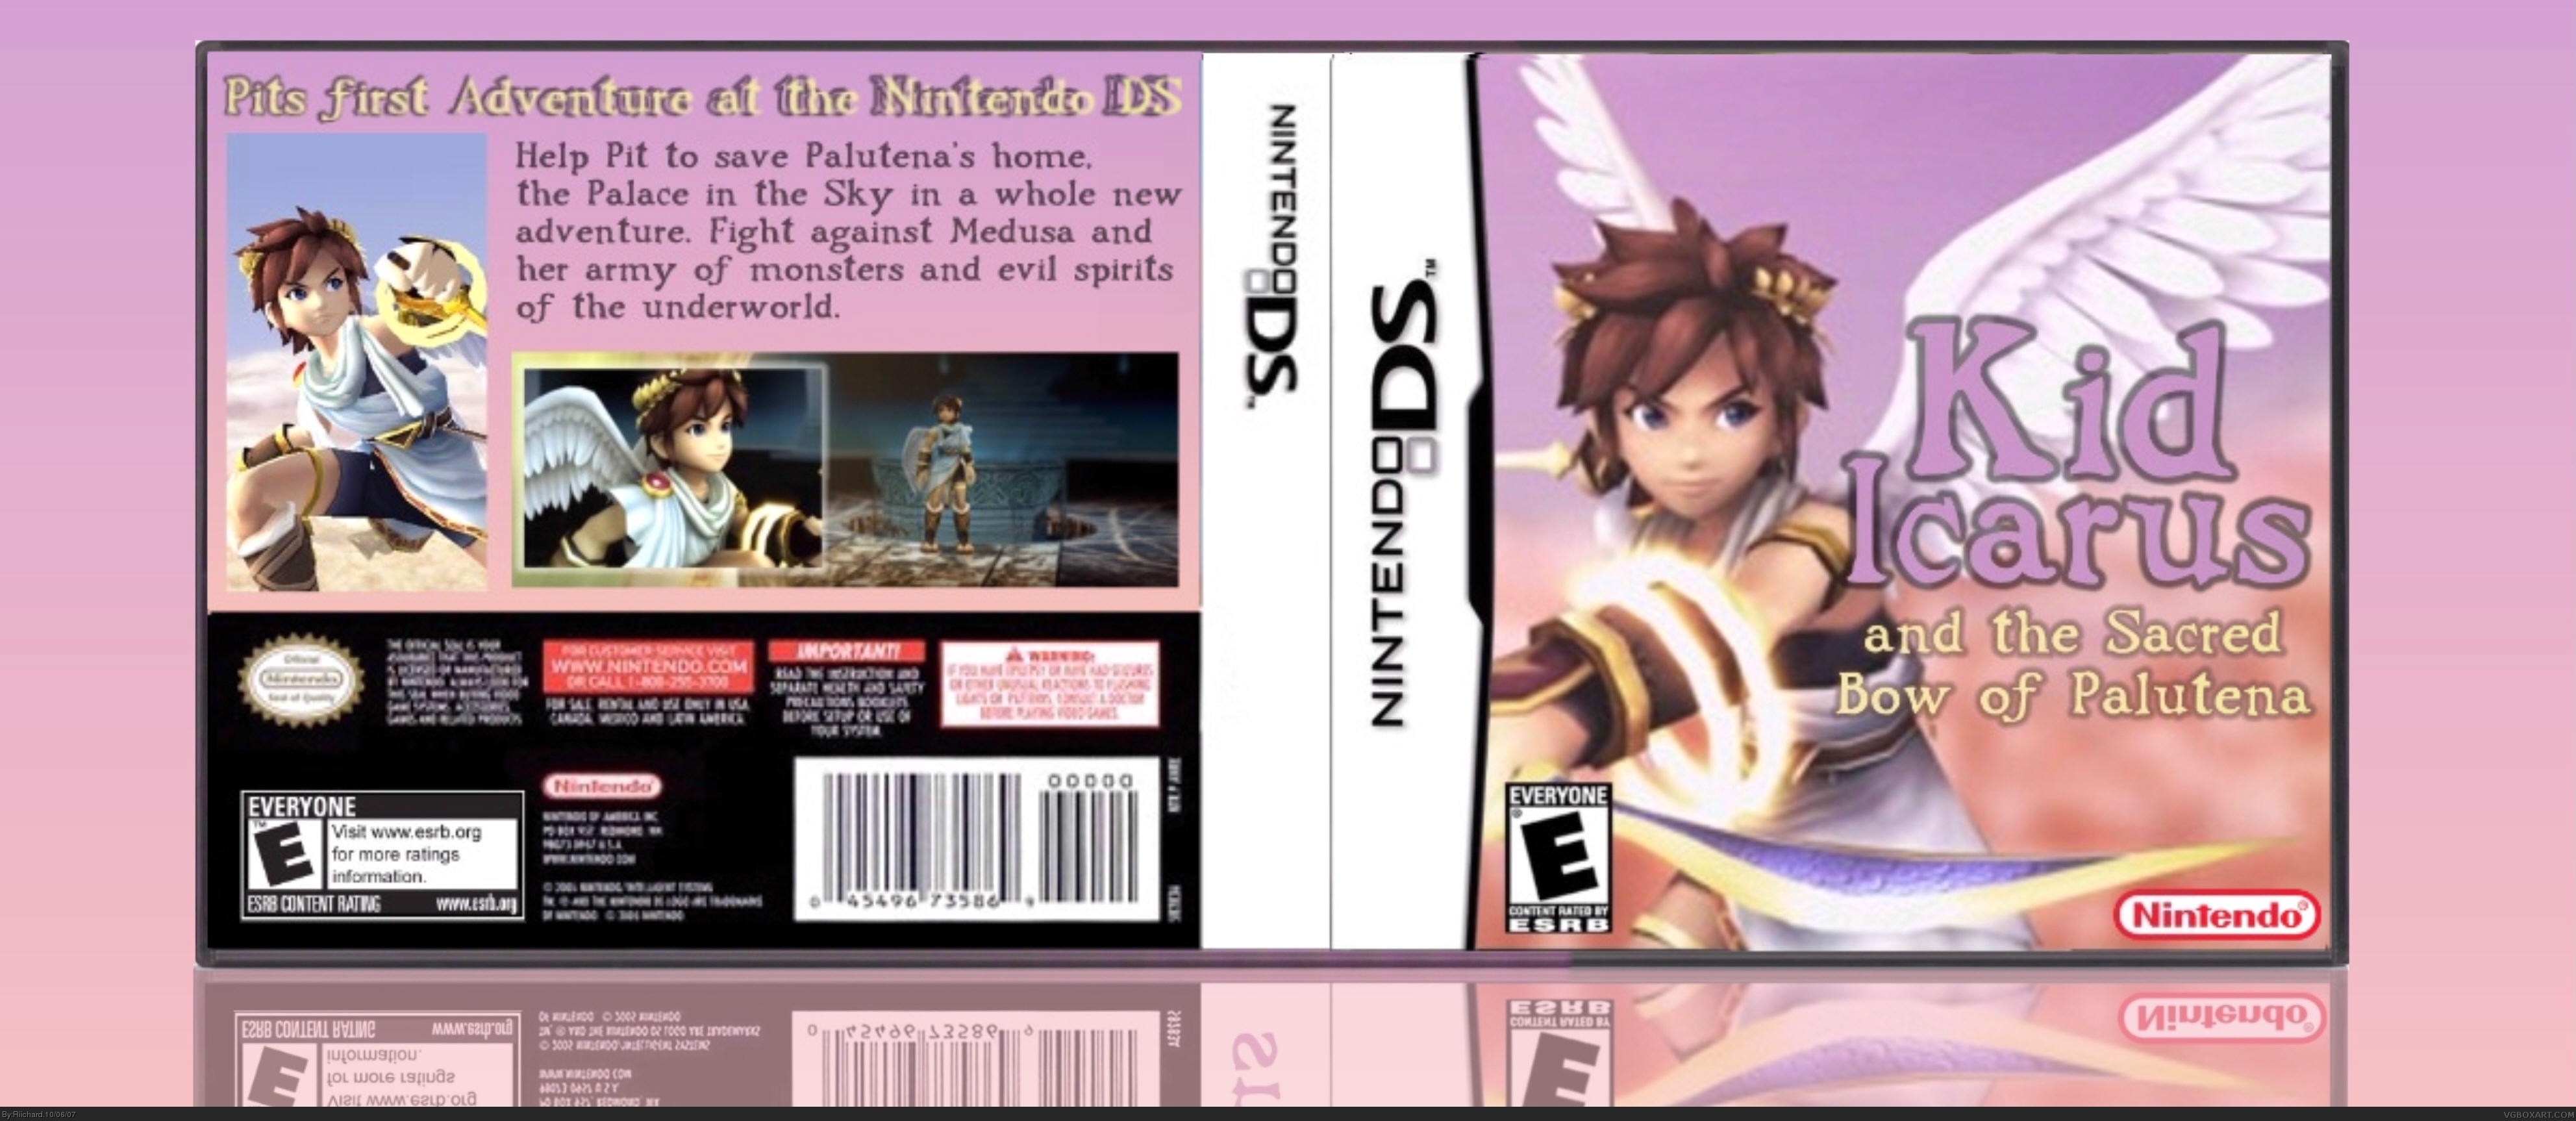 Kid Icarus DS box cover